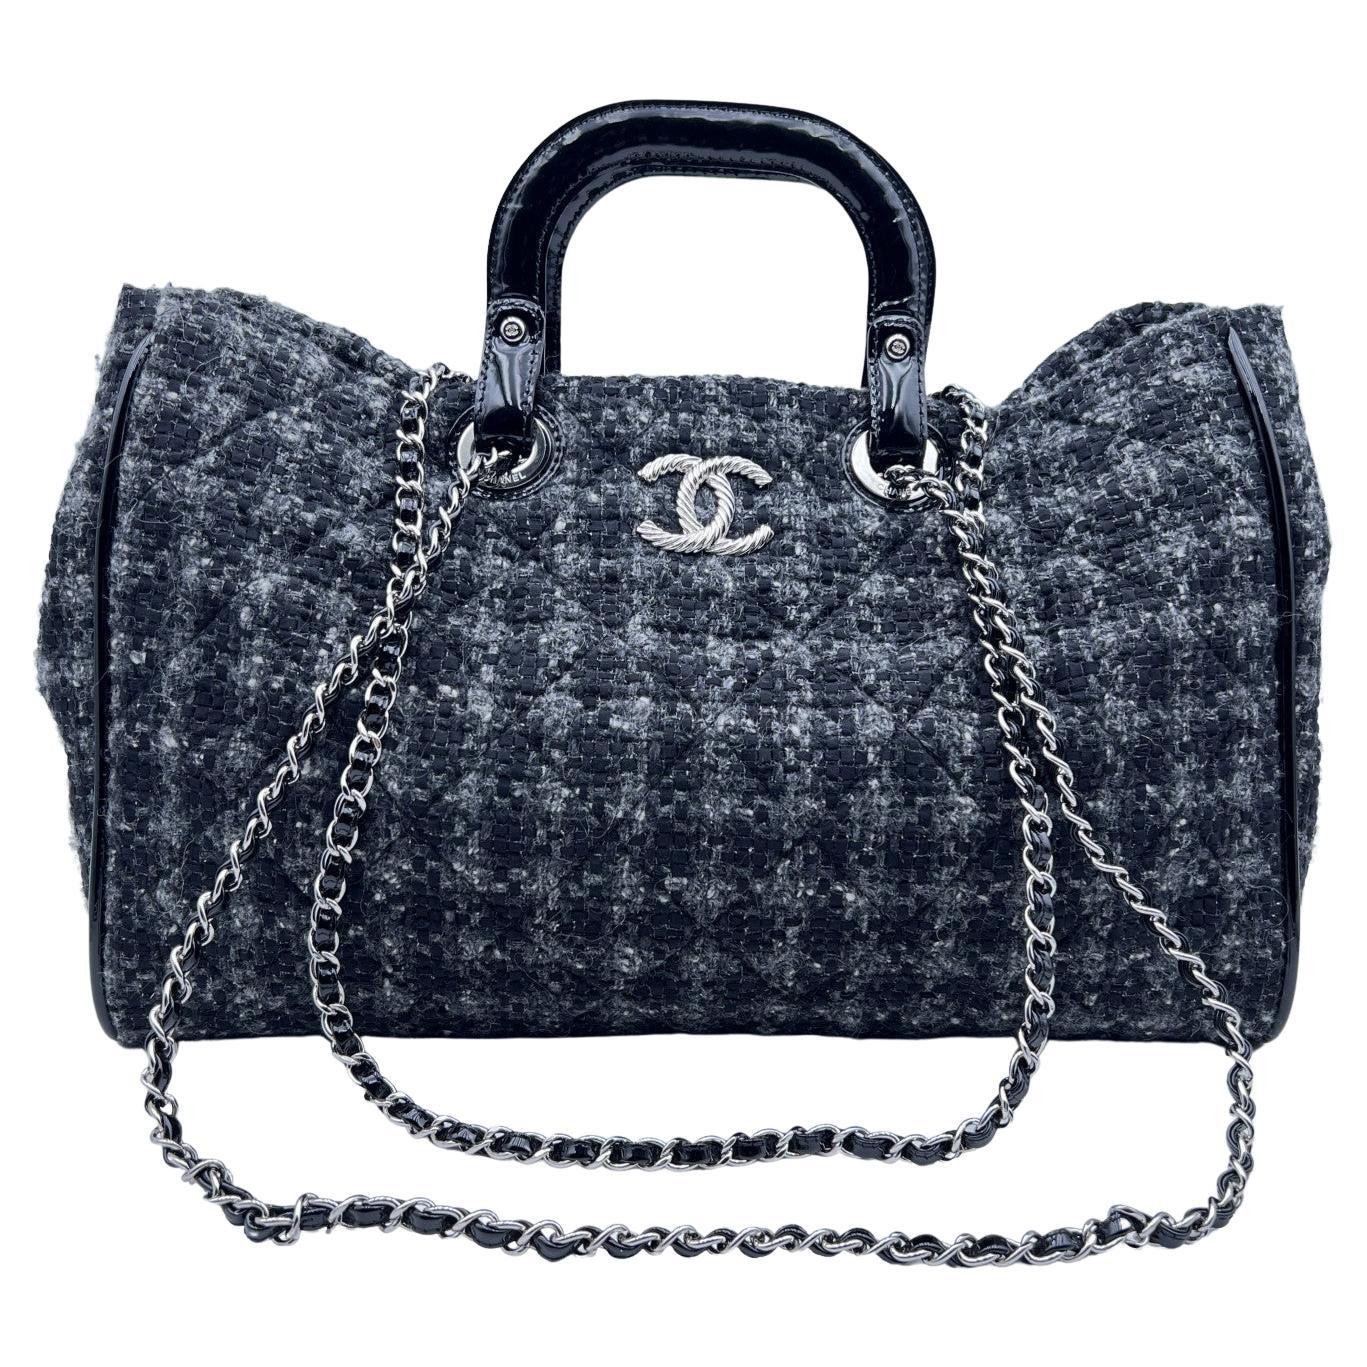 Chanel Grey Tweed and Patent Leather Tote Shoulder Bag